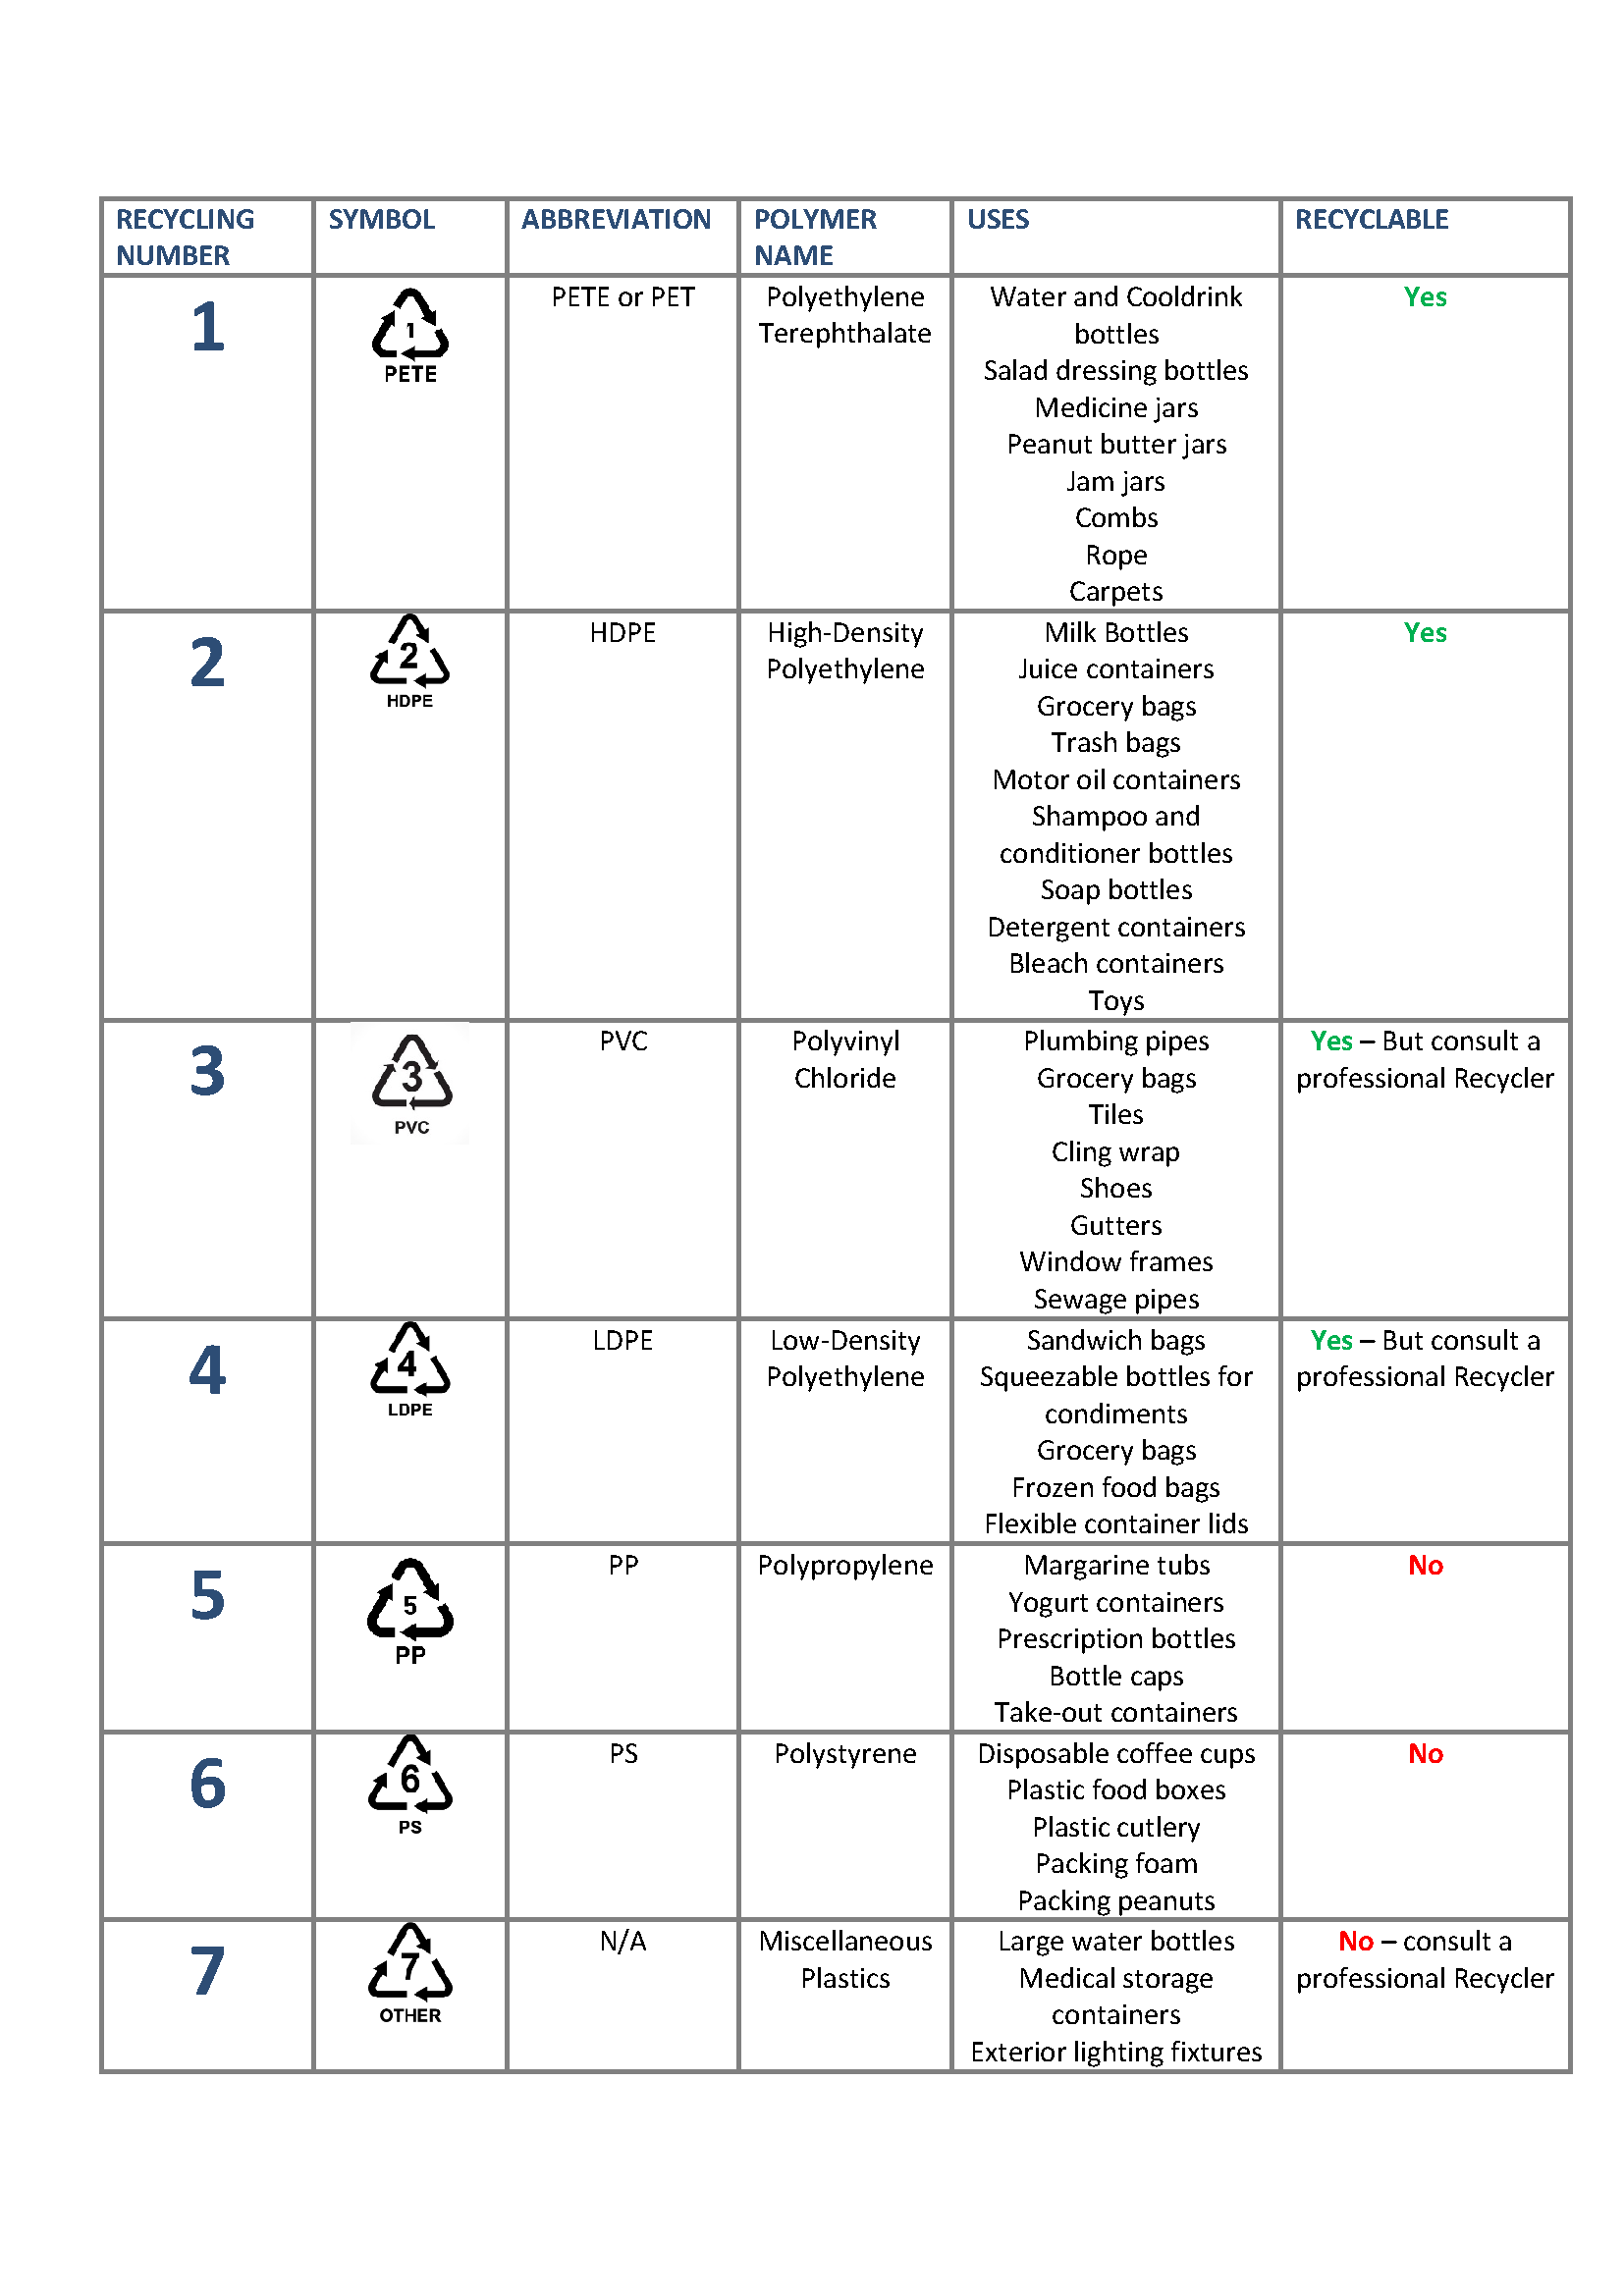 PLASTIC RECYCLING CODES